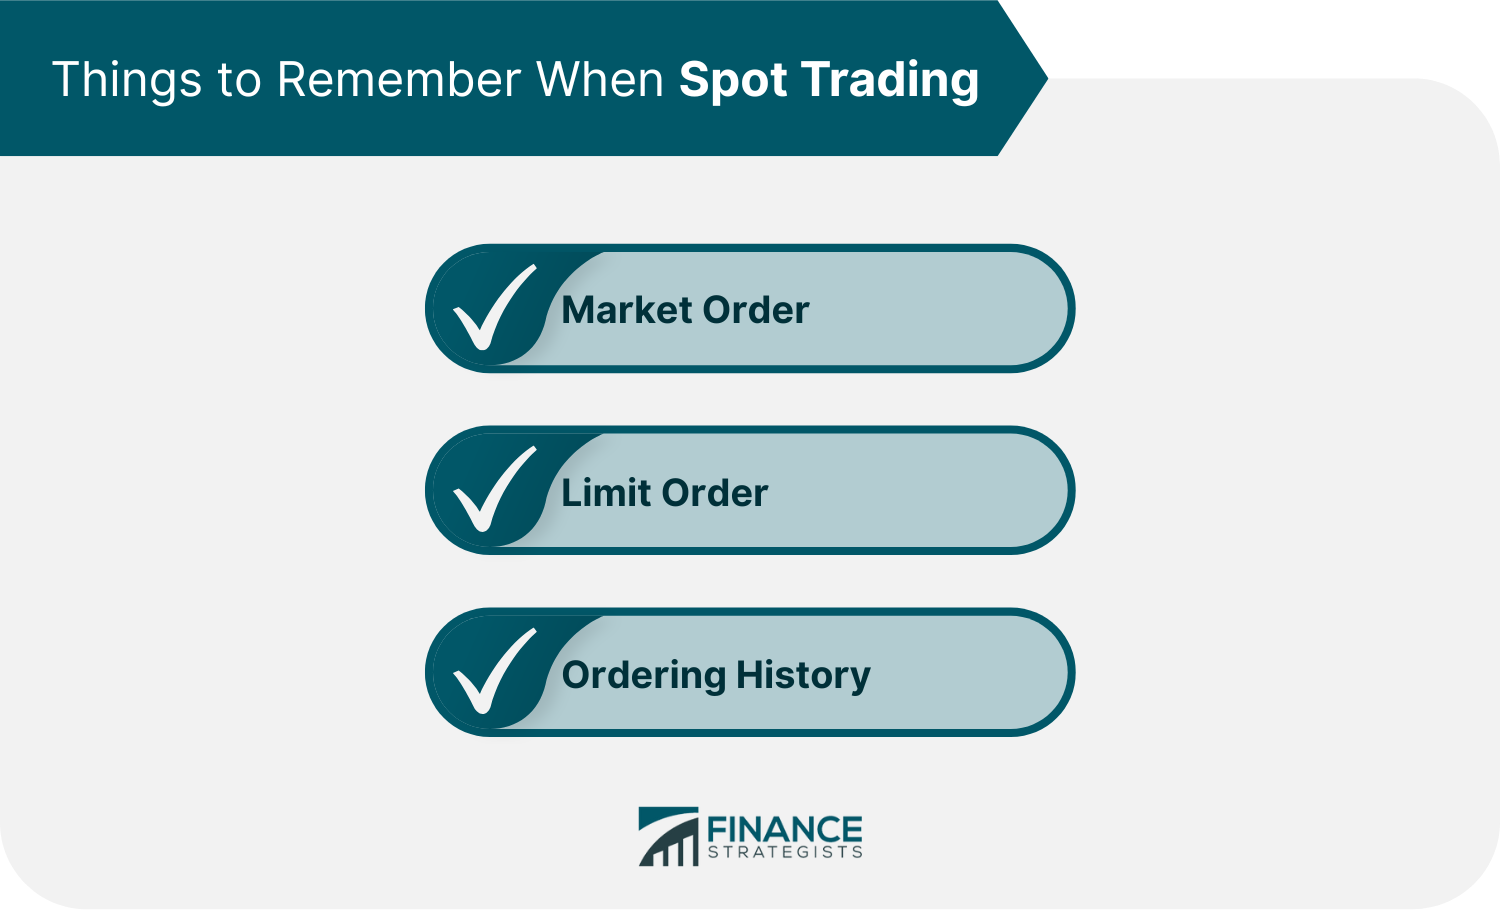 Things to Remember When Spot Trading